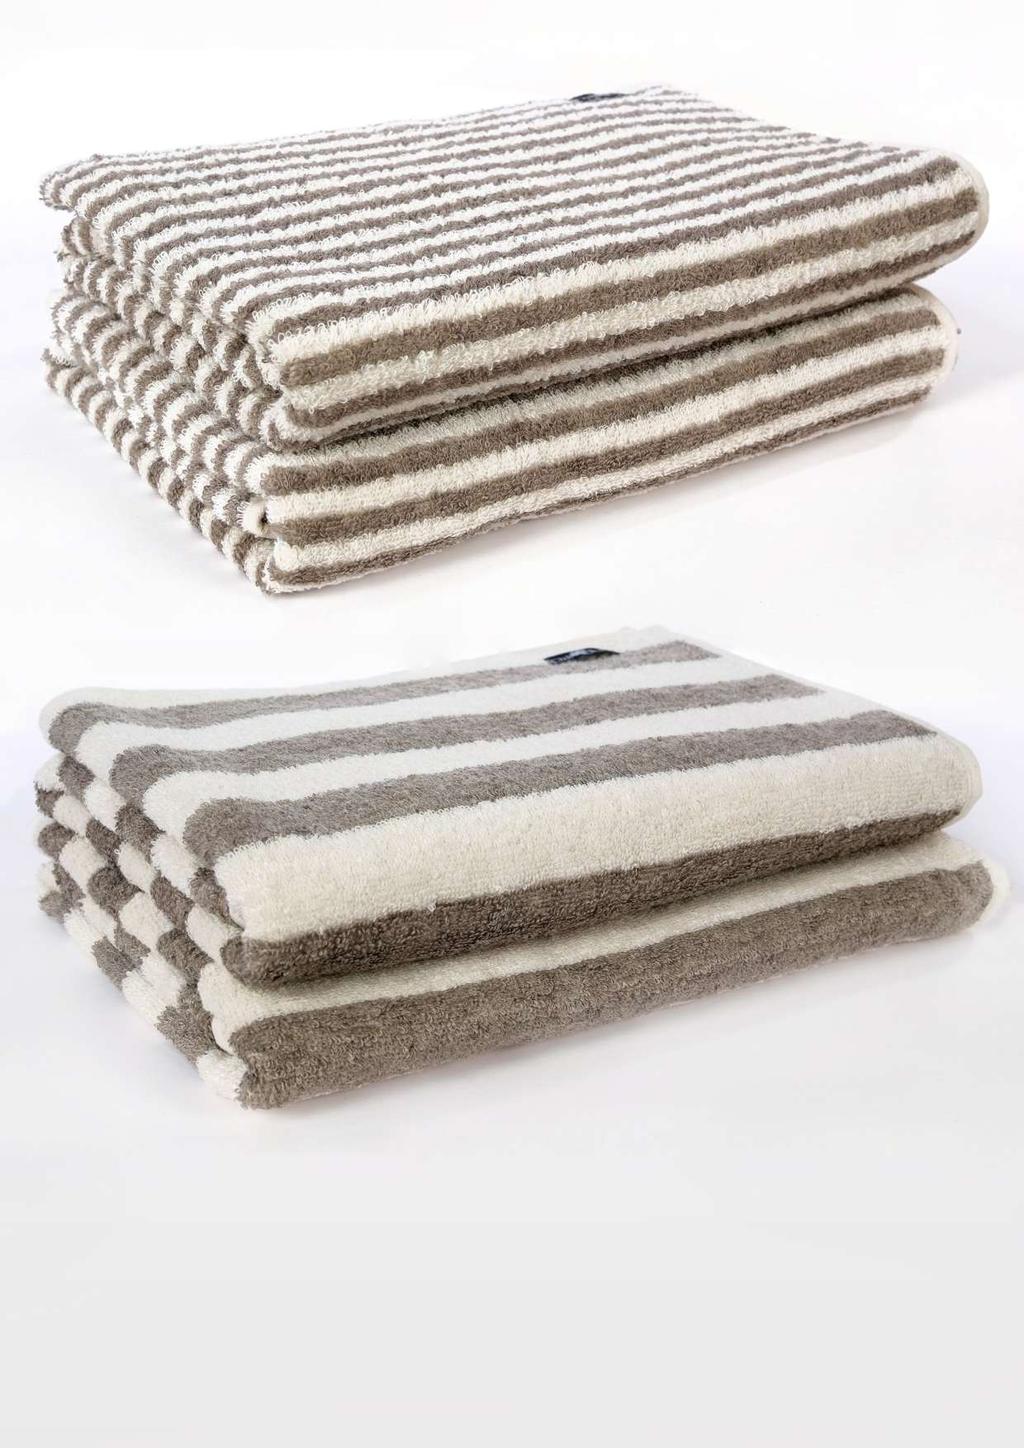 Terry towel in narrow stripes Color: White - natural brown 7